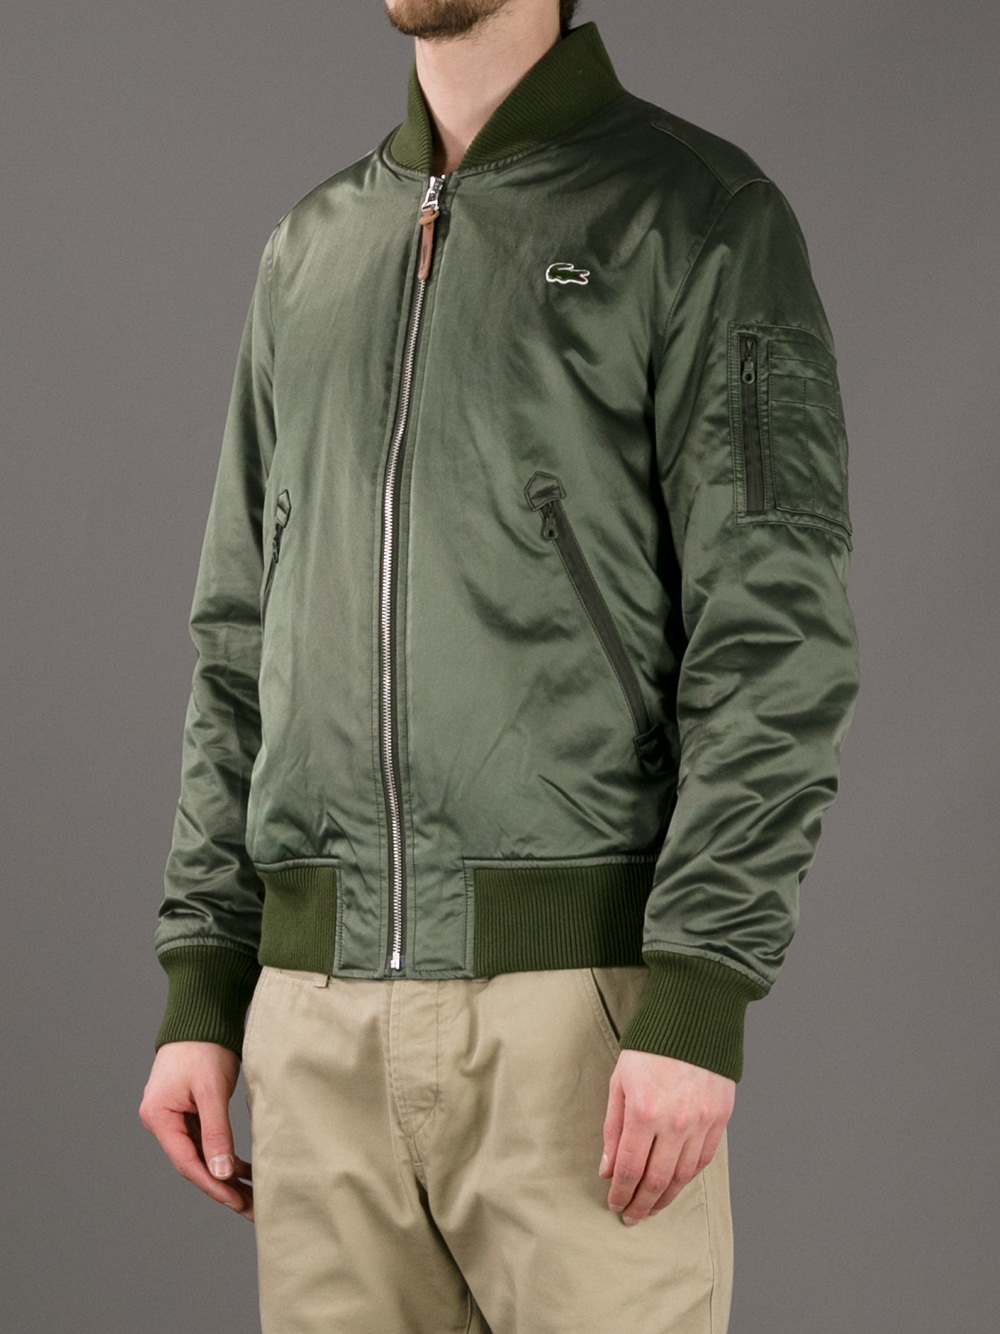 Lyst - Lacoste L!Ive Bomber Jacket in Green for Men